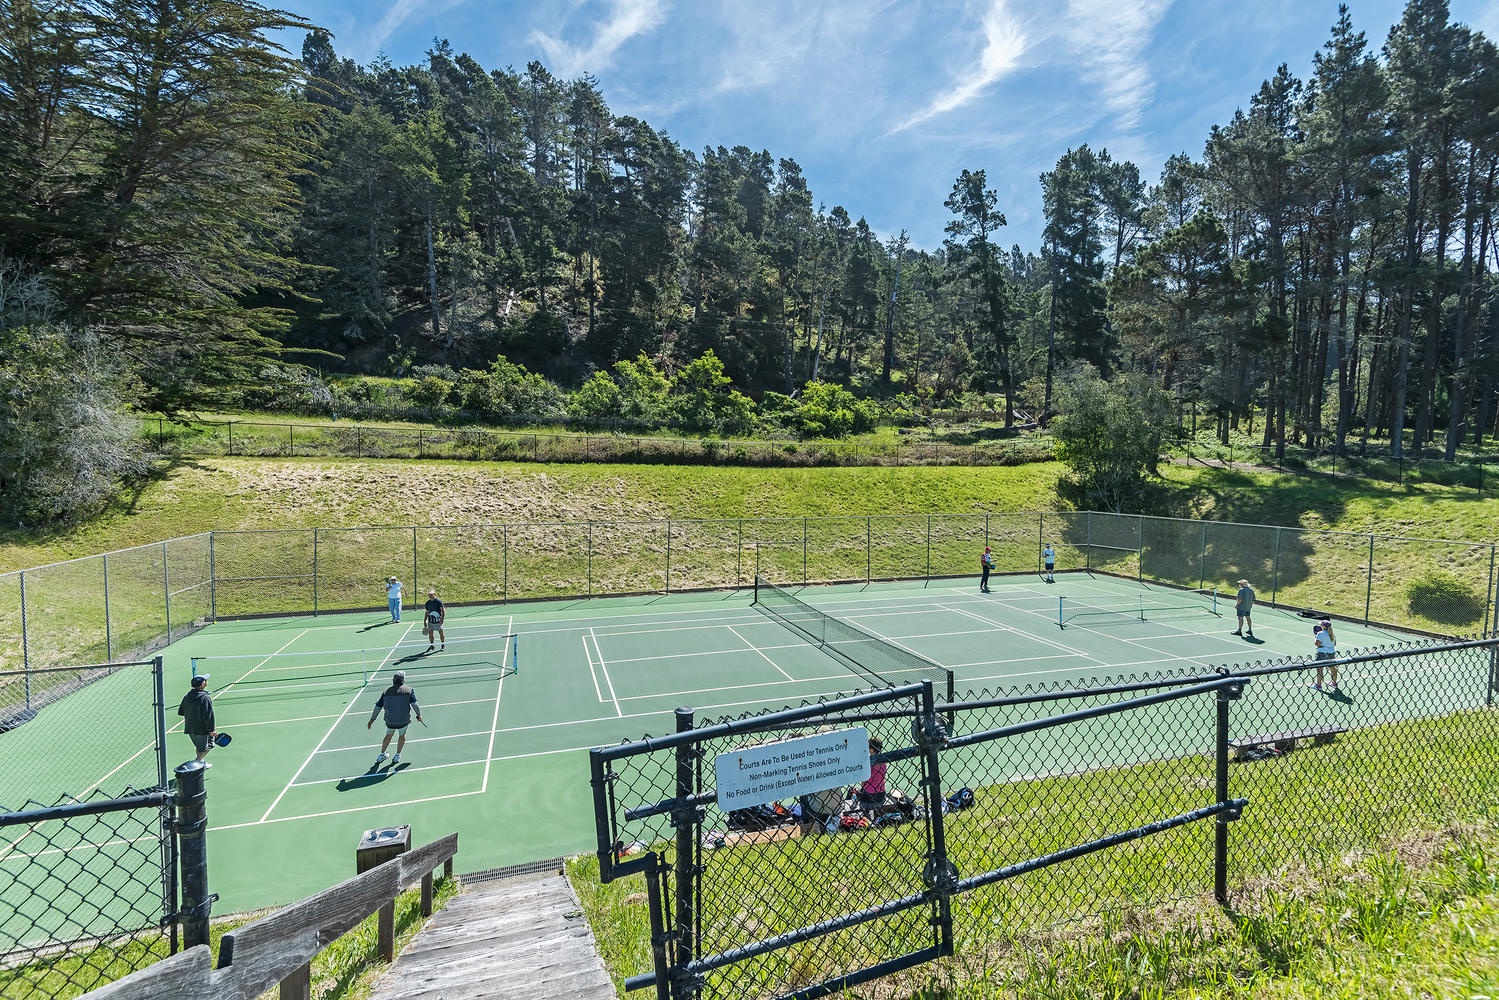 Recreation tennis and pickleball courts